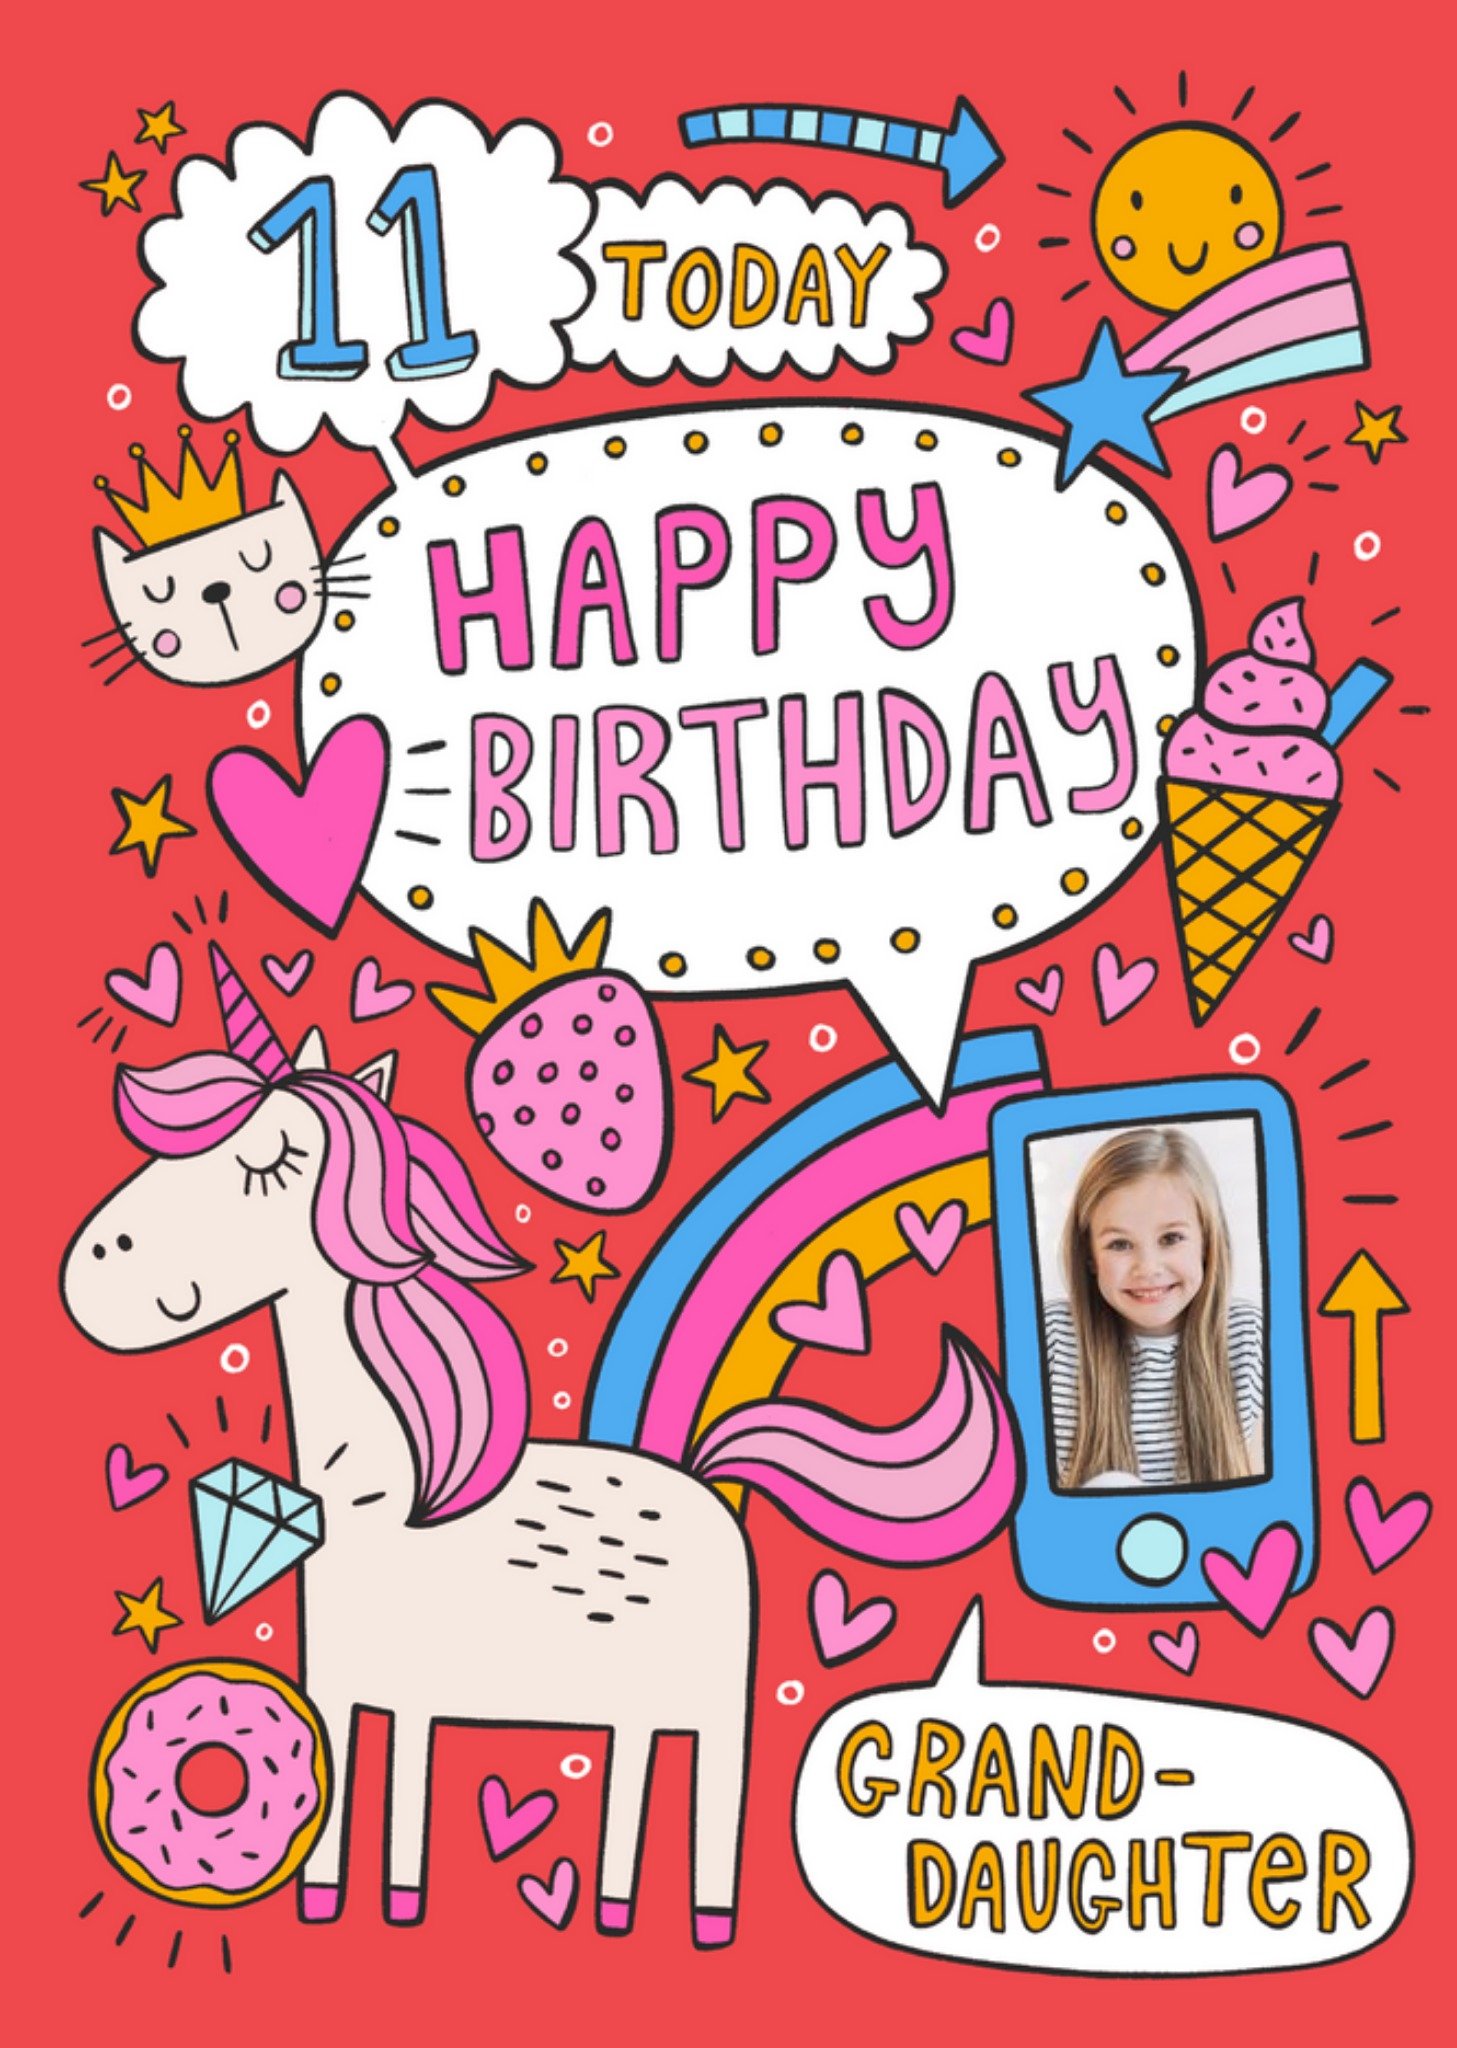 Moonpig 11 Today Happy Birthday Granddaughter Fun Doodle Photo Upload Card, Large